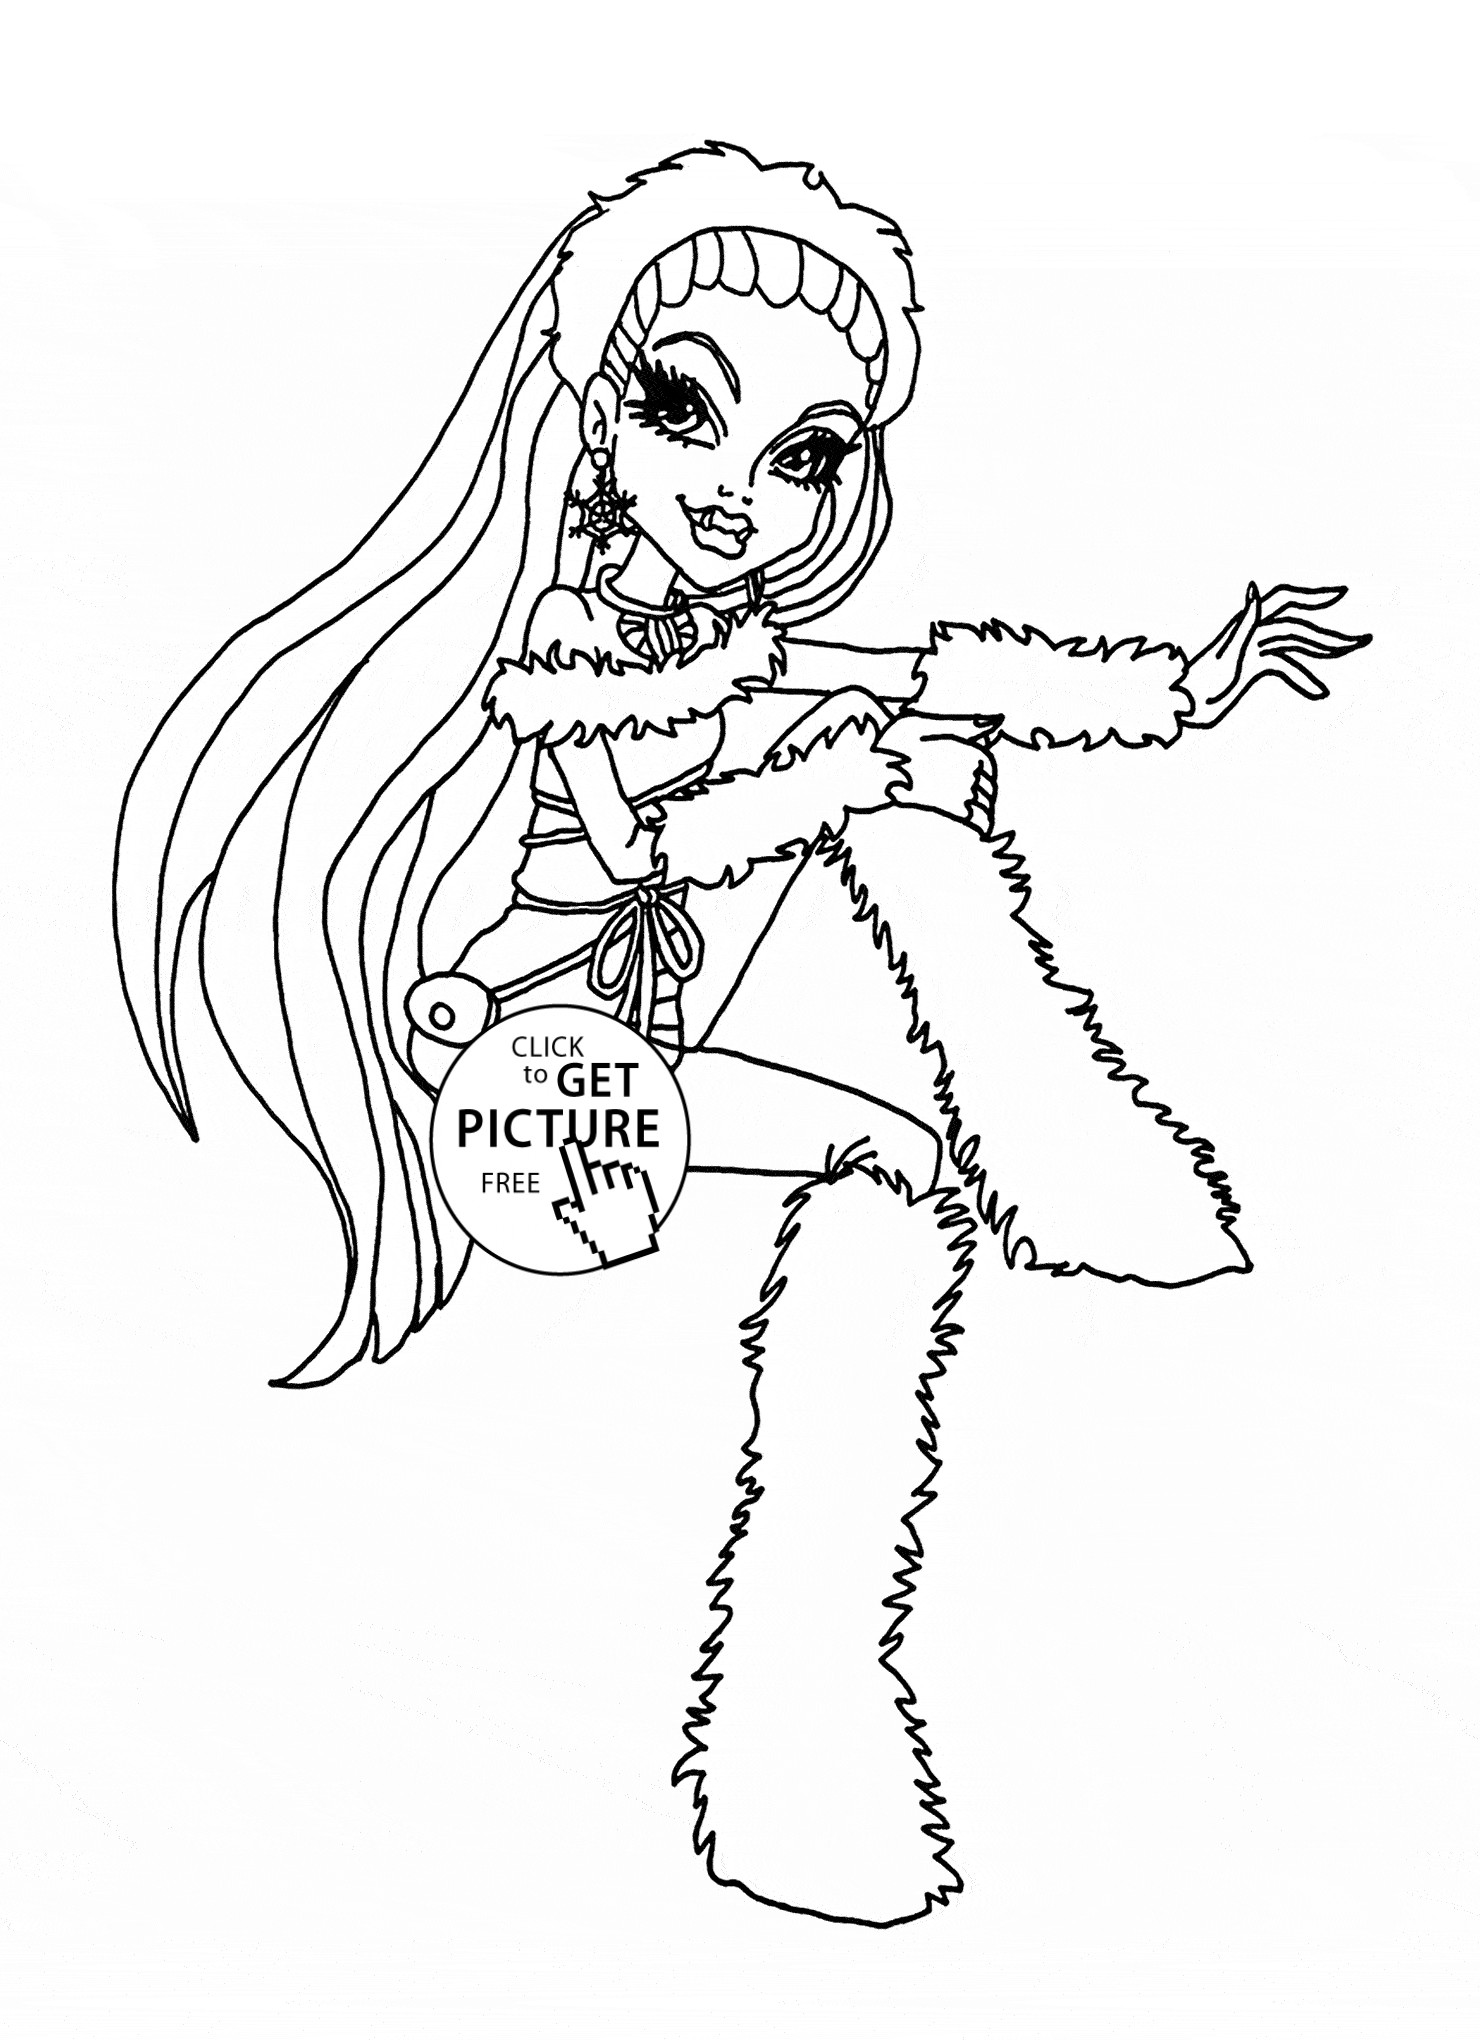 Coloring Pages For Girls Monster High Printable
 Abbey Monster High coloring page for girls for kids